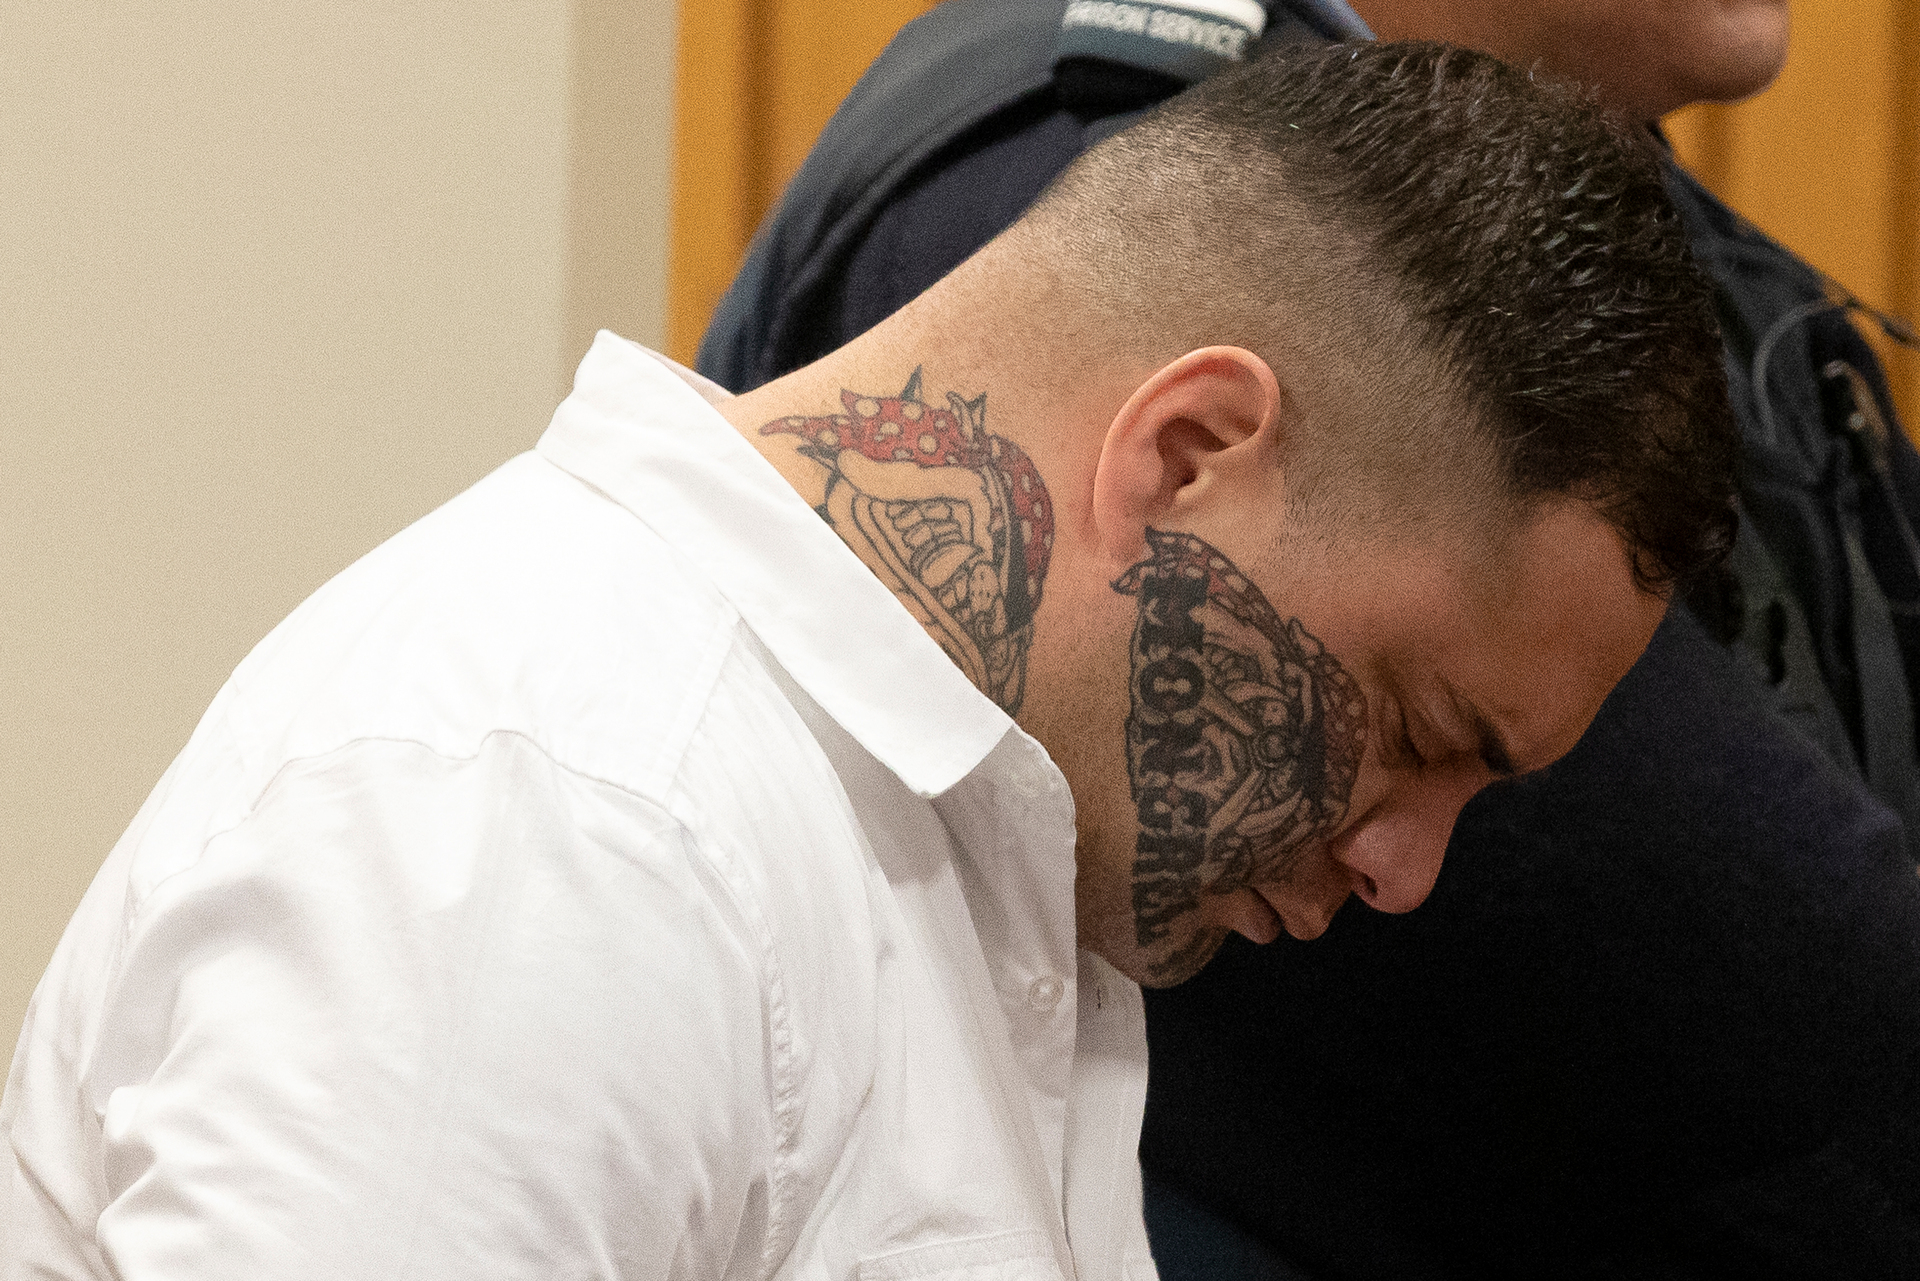 Attorney wants jurors who won't judge client's face tattoos